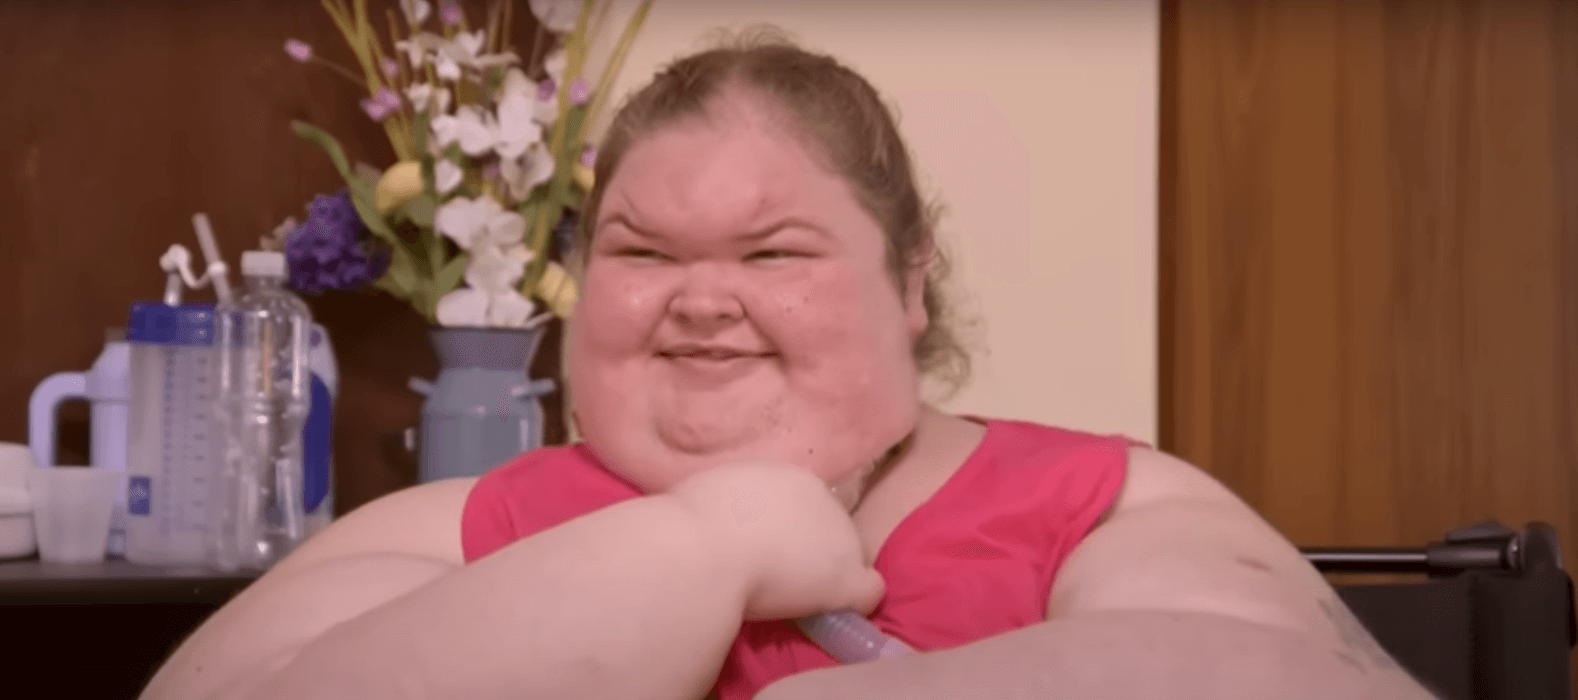 Tammy Slaton of '1000-lb Sisters' smiling in a pink top